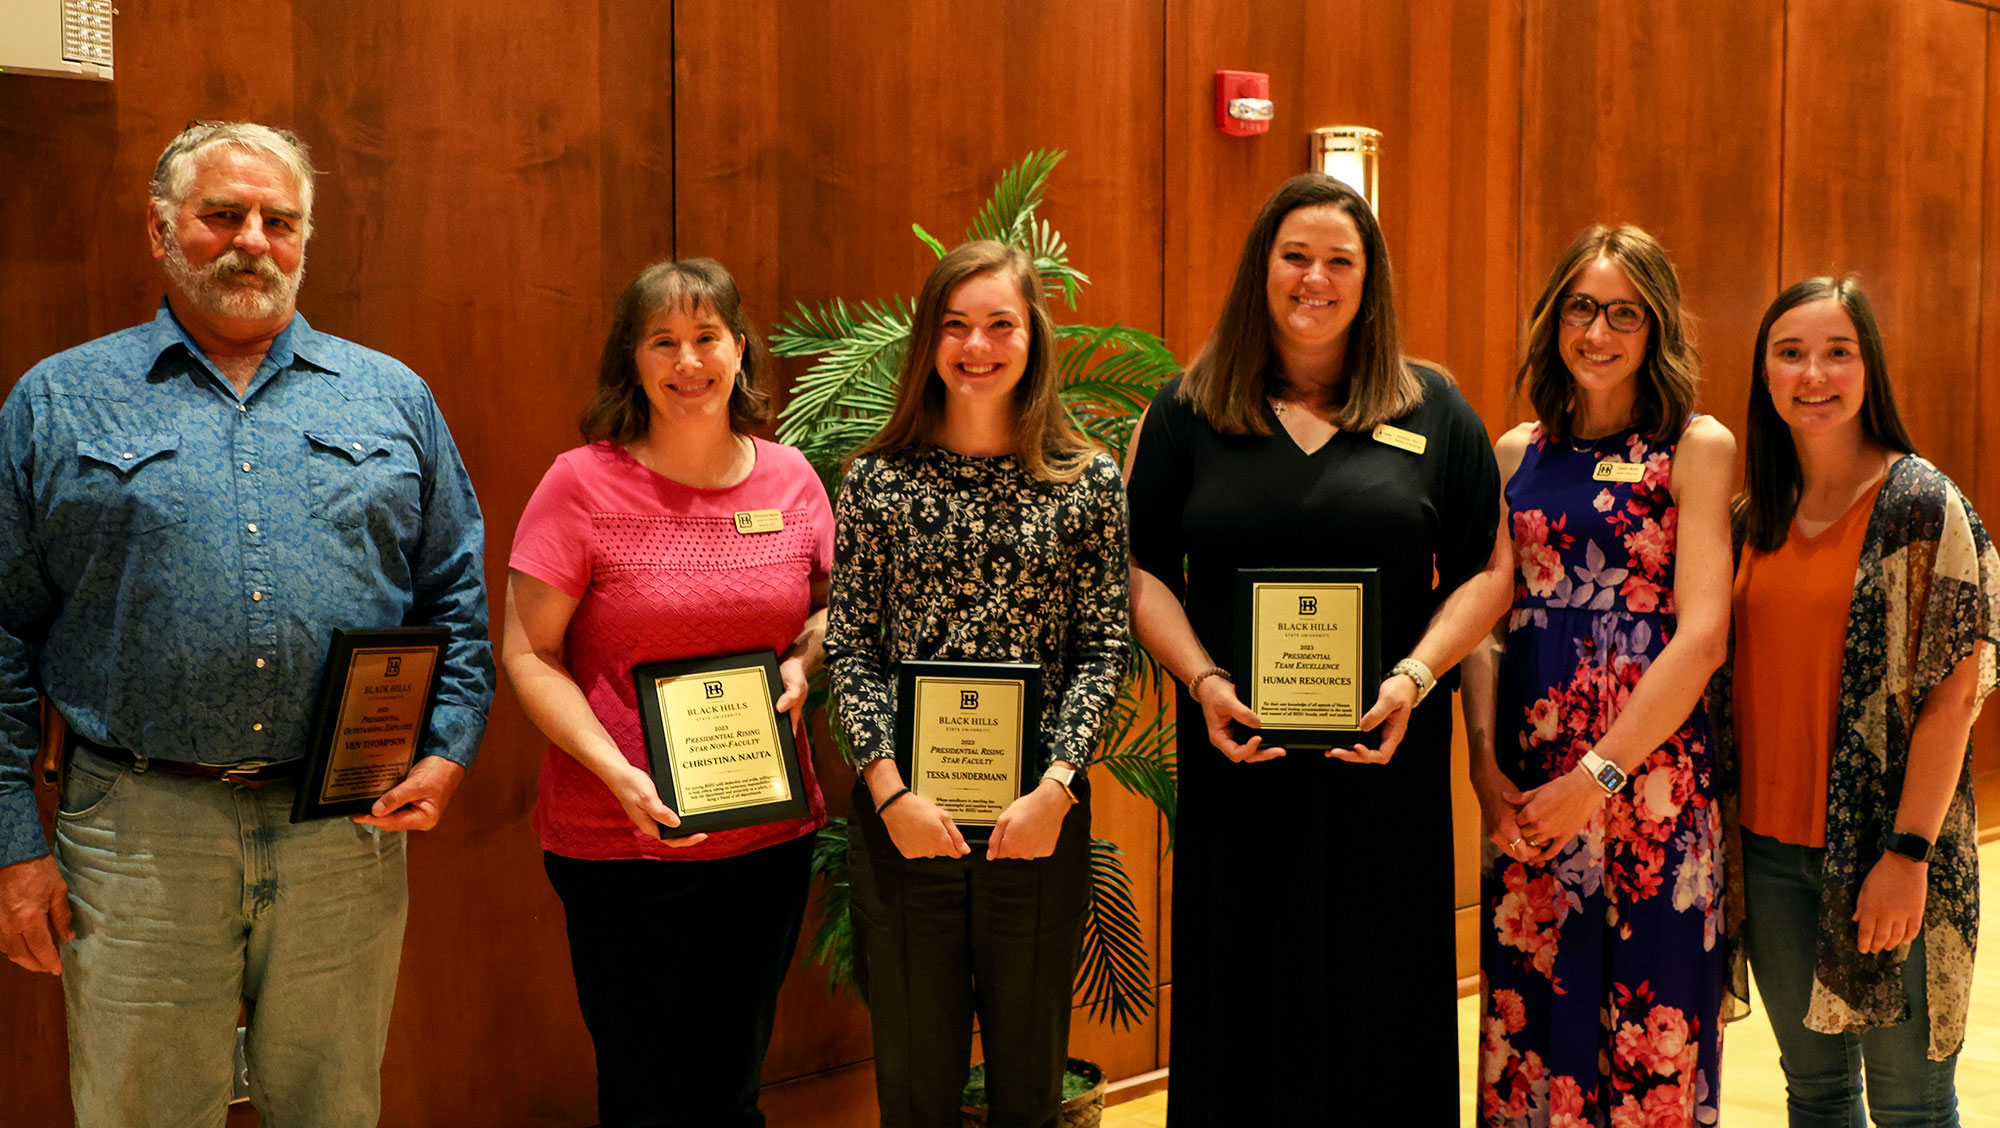 Recipients of the 2023 BHSU Employee Awards pose together for a group photo during the annual State of the University address. (From left: Ven Thompson, Chrstina Nauta, Tessa Sundermann, Melissa Hart, Cassie Maser, and Bailey Froelich.)